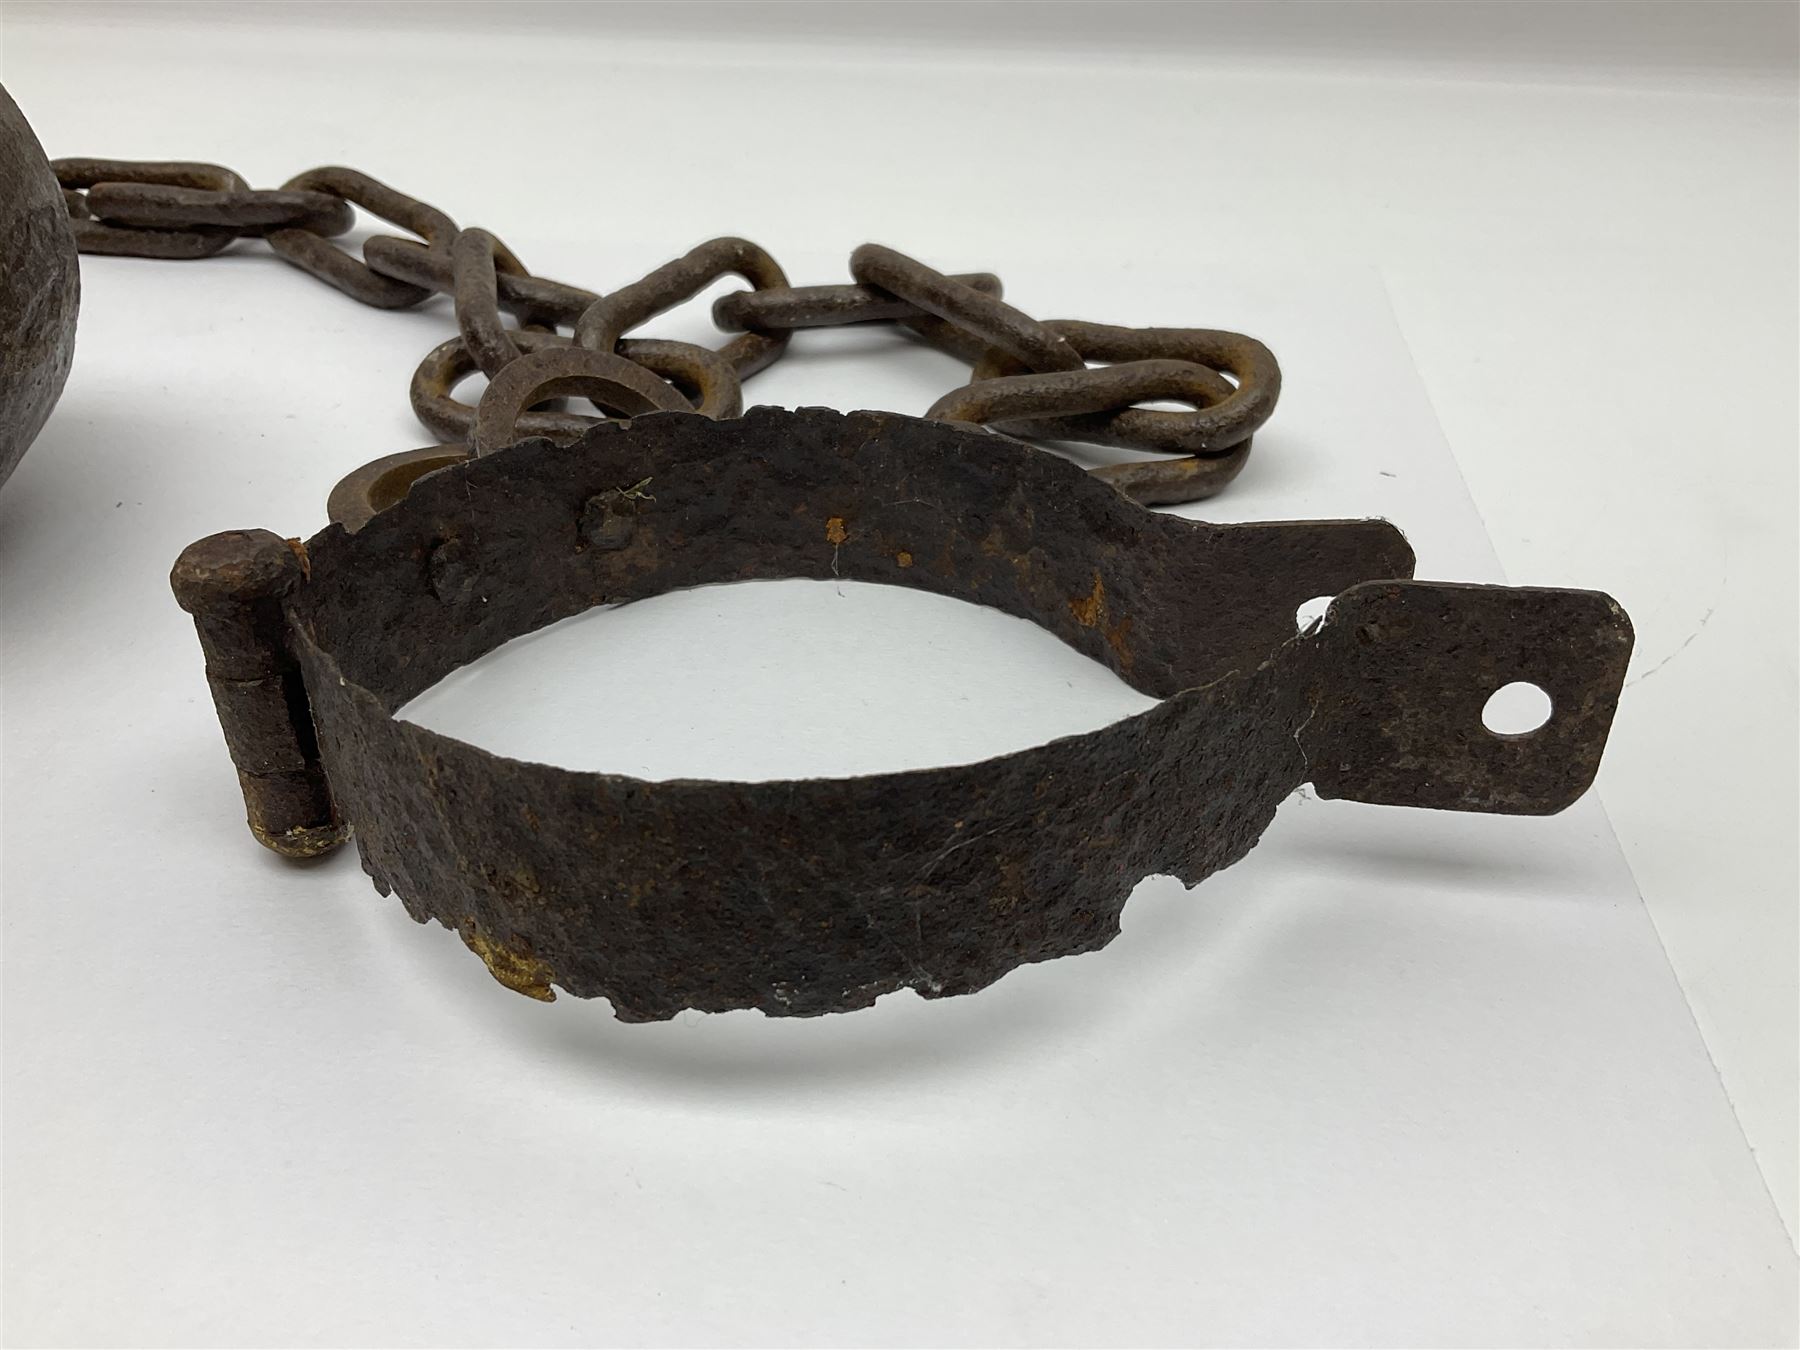 Late 19th/early 20th century prisoners iron ball and chain, with